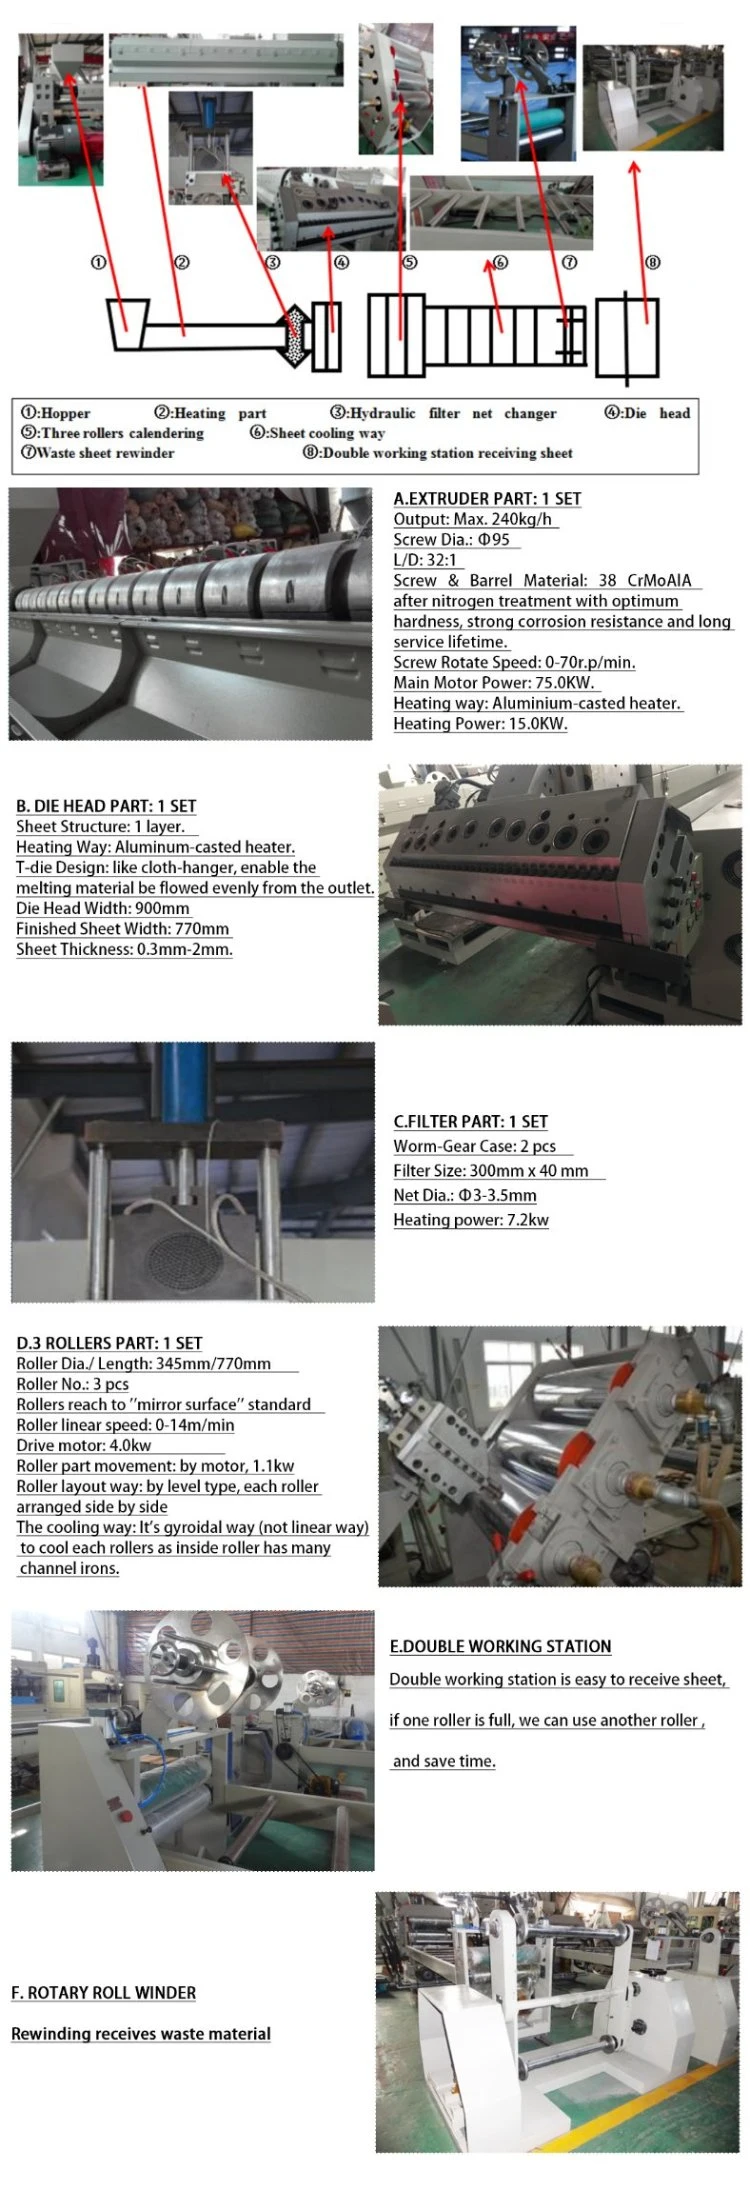 China Manufactured New Second Pet Sheet Extruder for Making Plastic Box Packing Box and Formwork Board